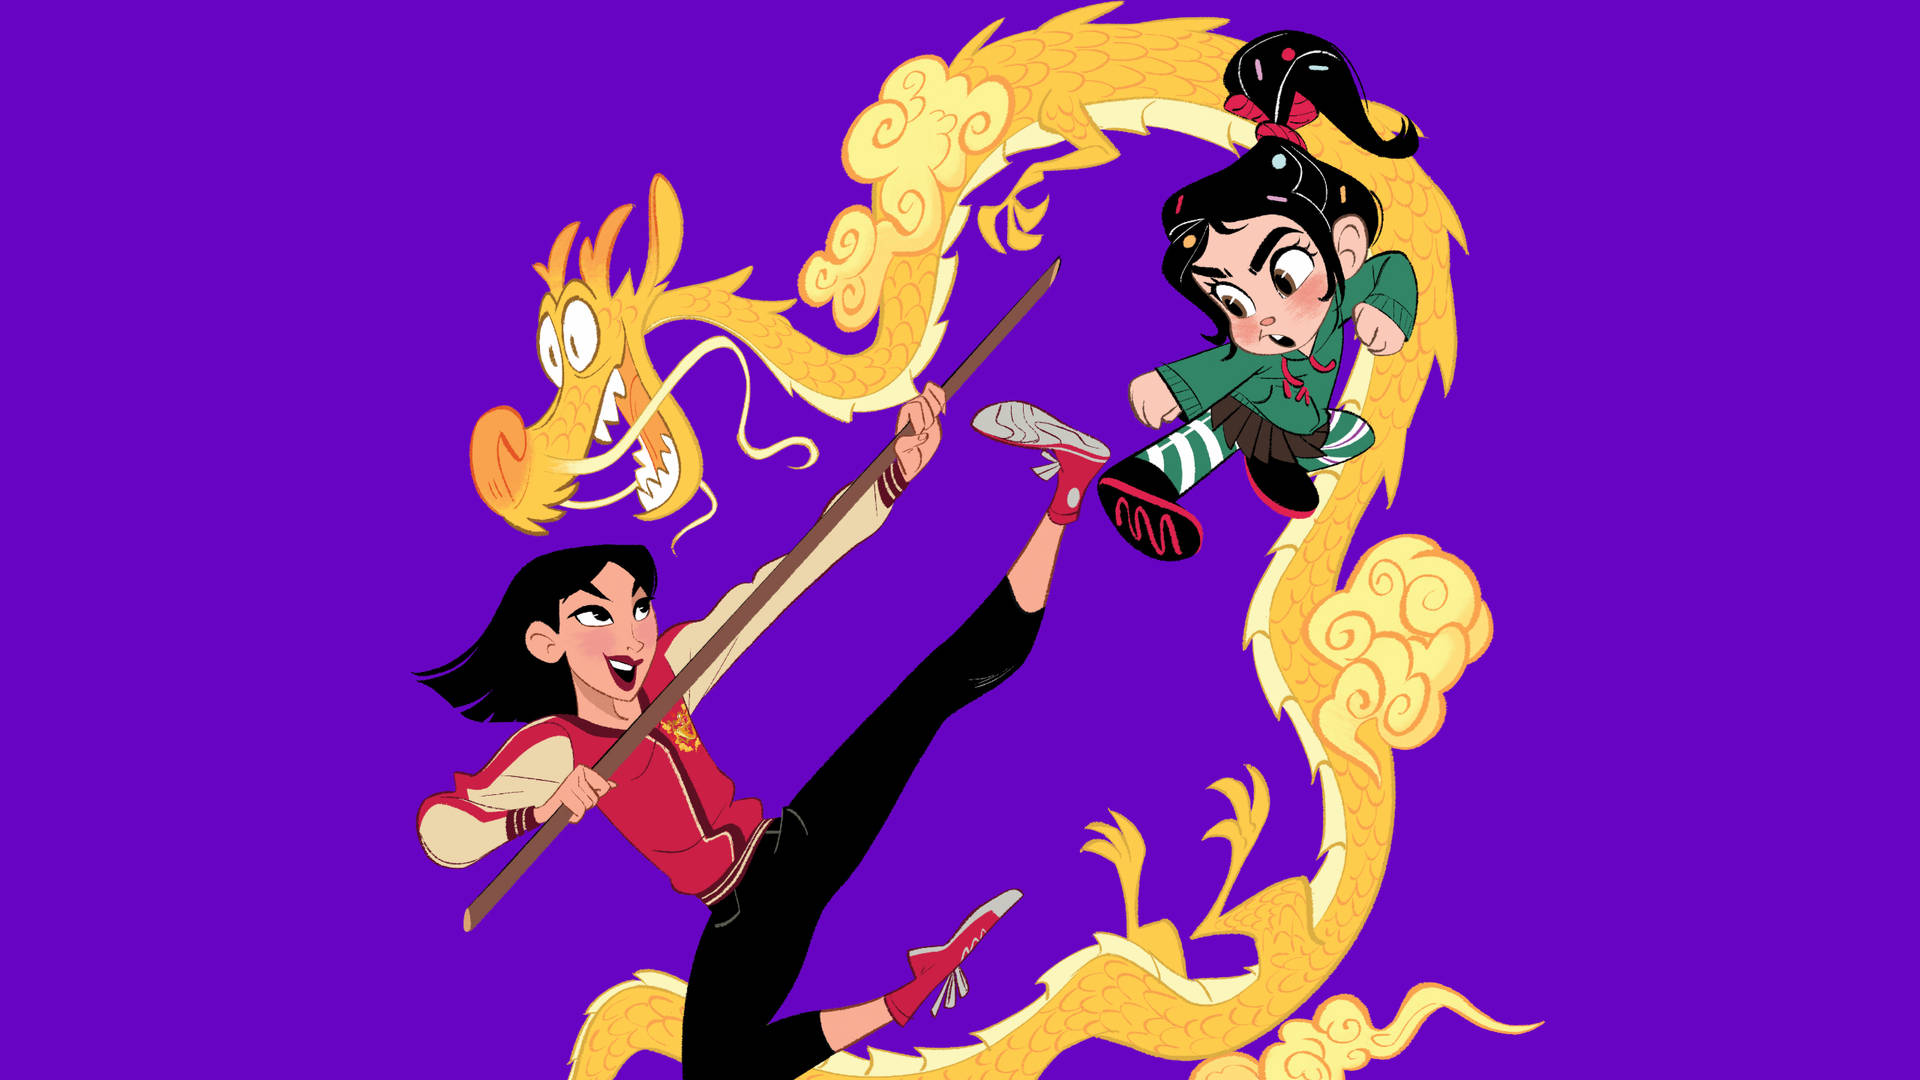 Mulan And Vanellope Lead The Charge In A Disney Crossover.